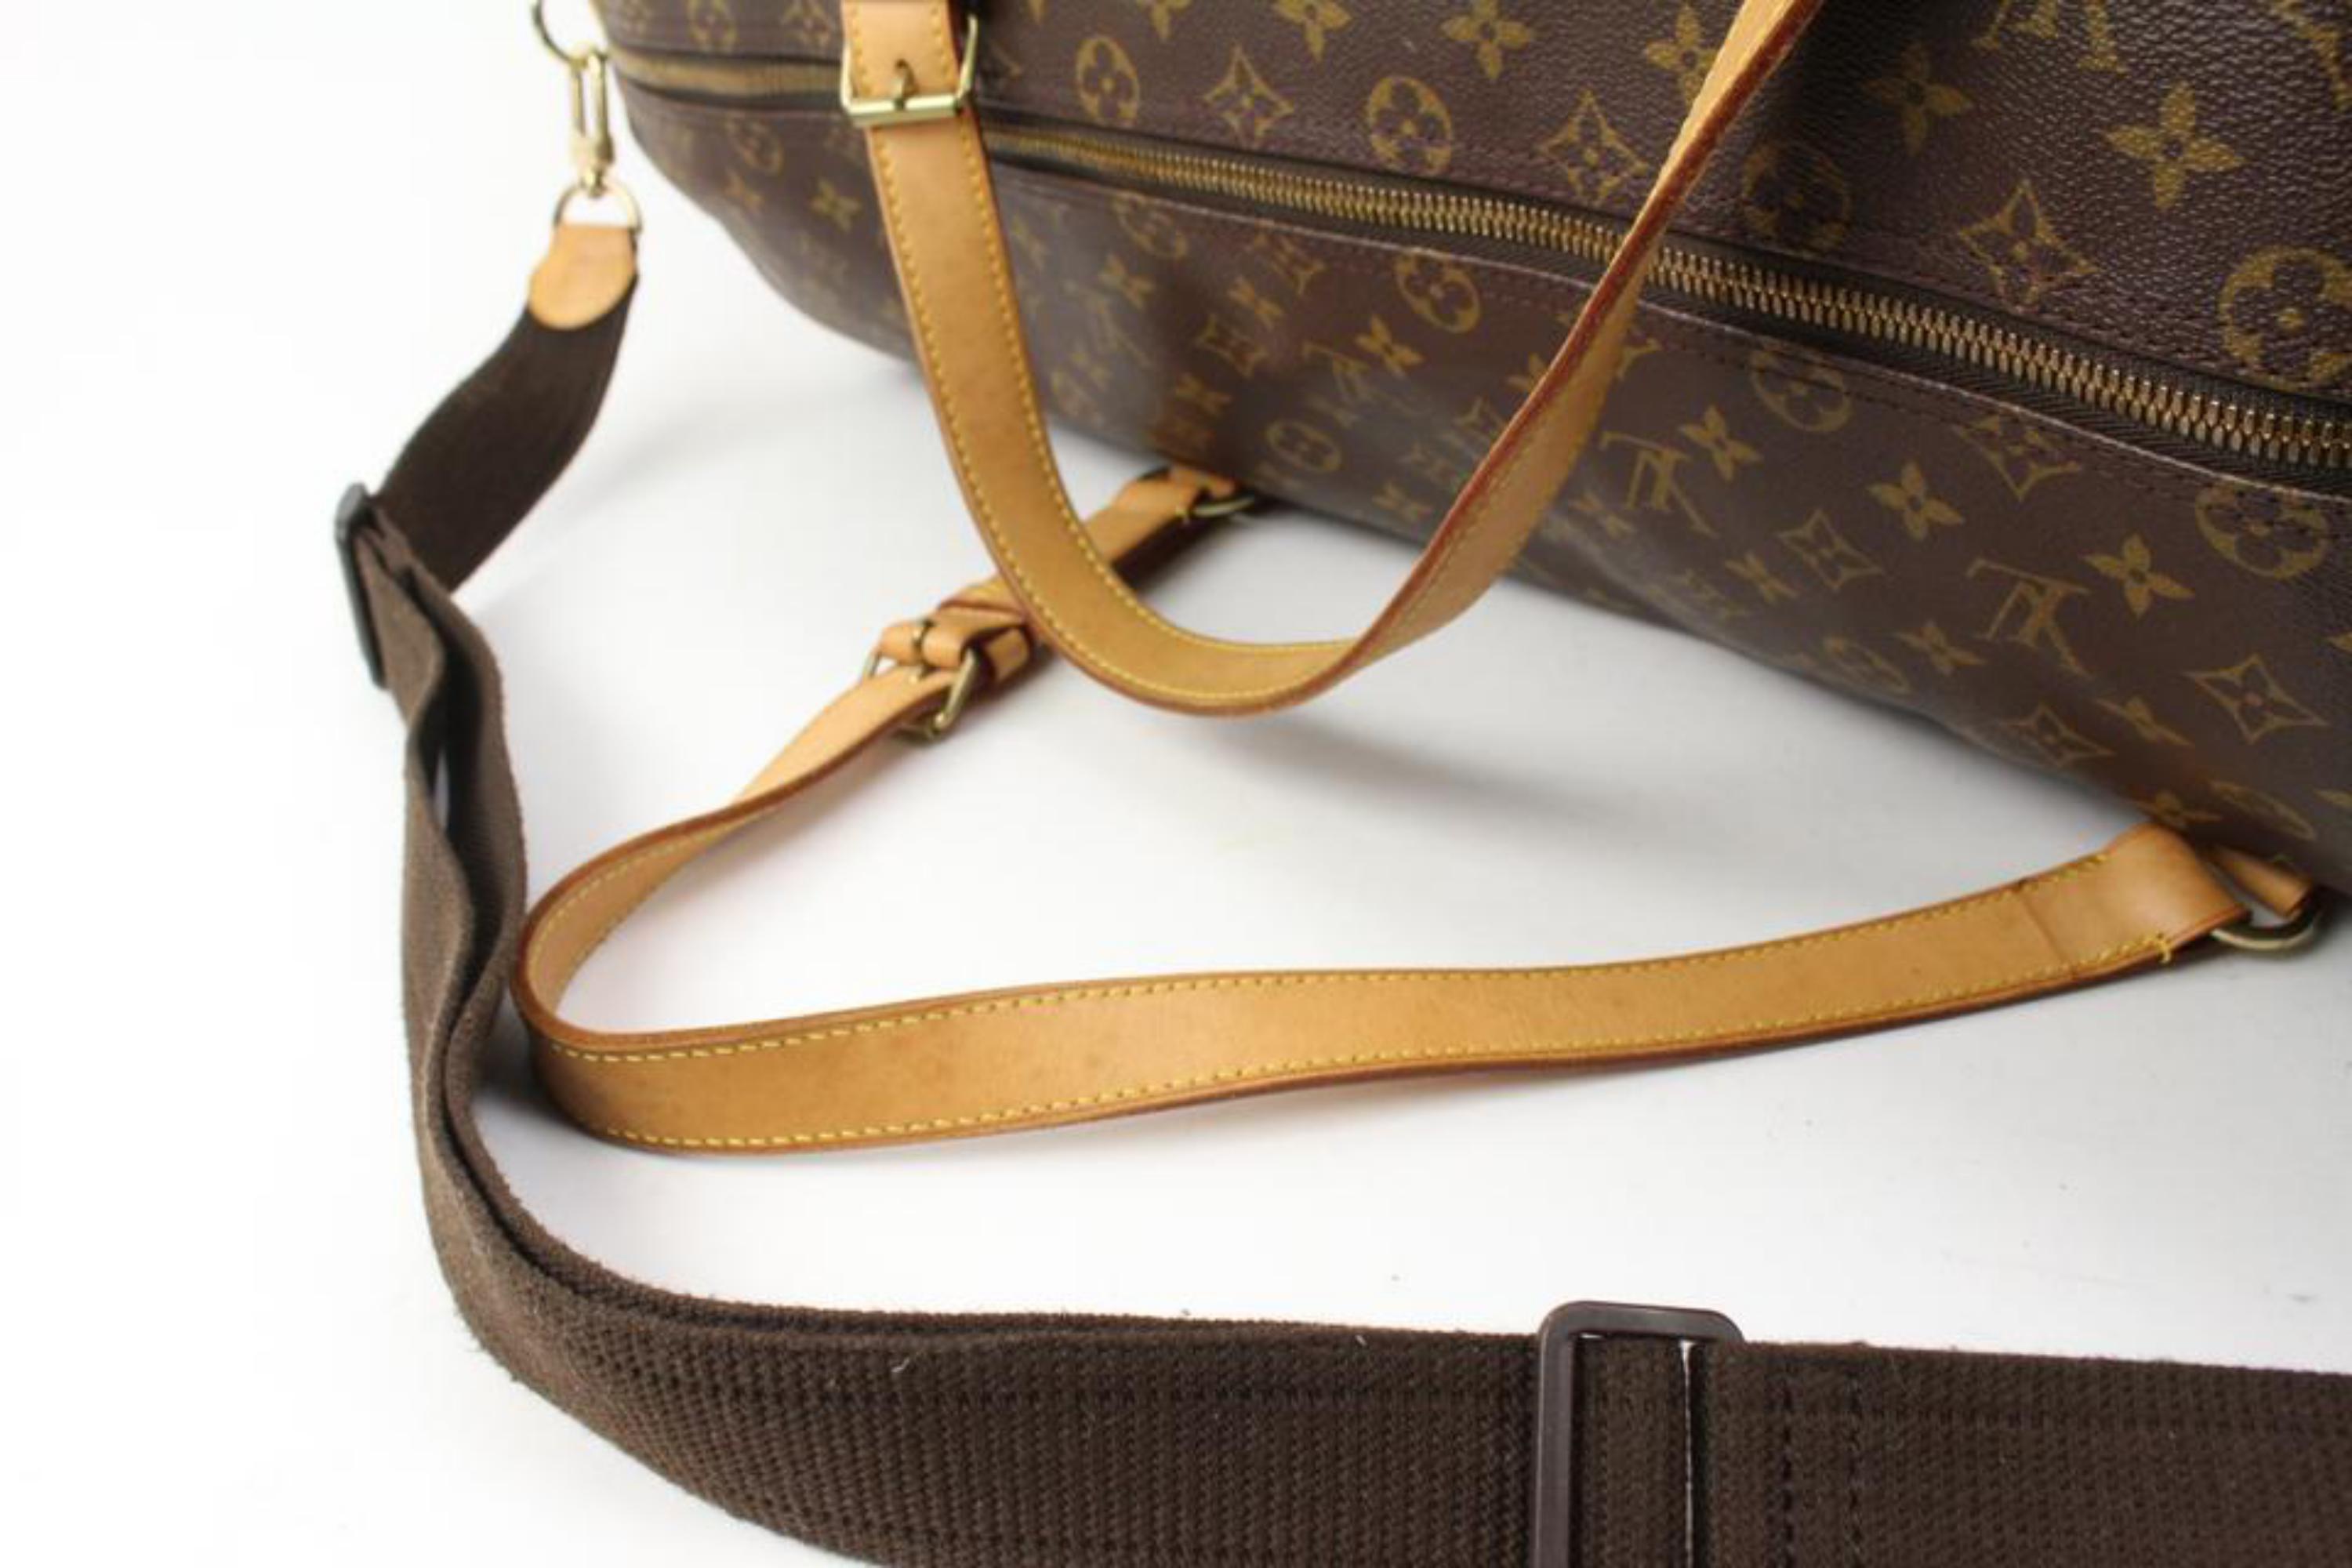 Louis Vuitton Discontinued Monogram Sac Polochon 70 Keepall Bandouliere 125lv36  In Good Condition For Sale In Dix hills, NY